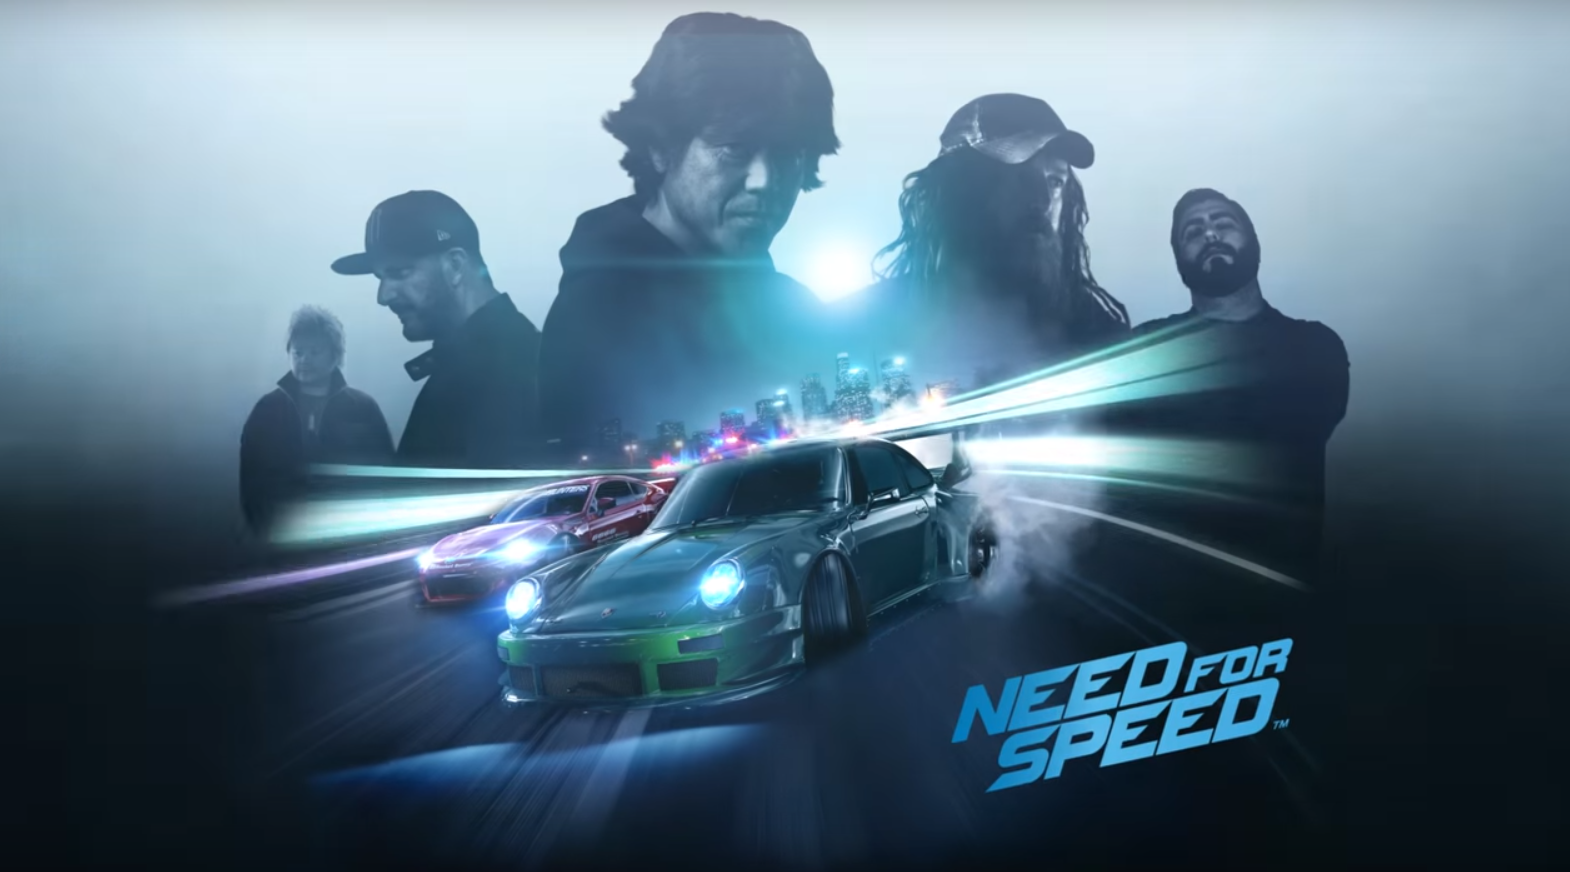 Need For Speed Update Bringing New Features - mxdwn Games